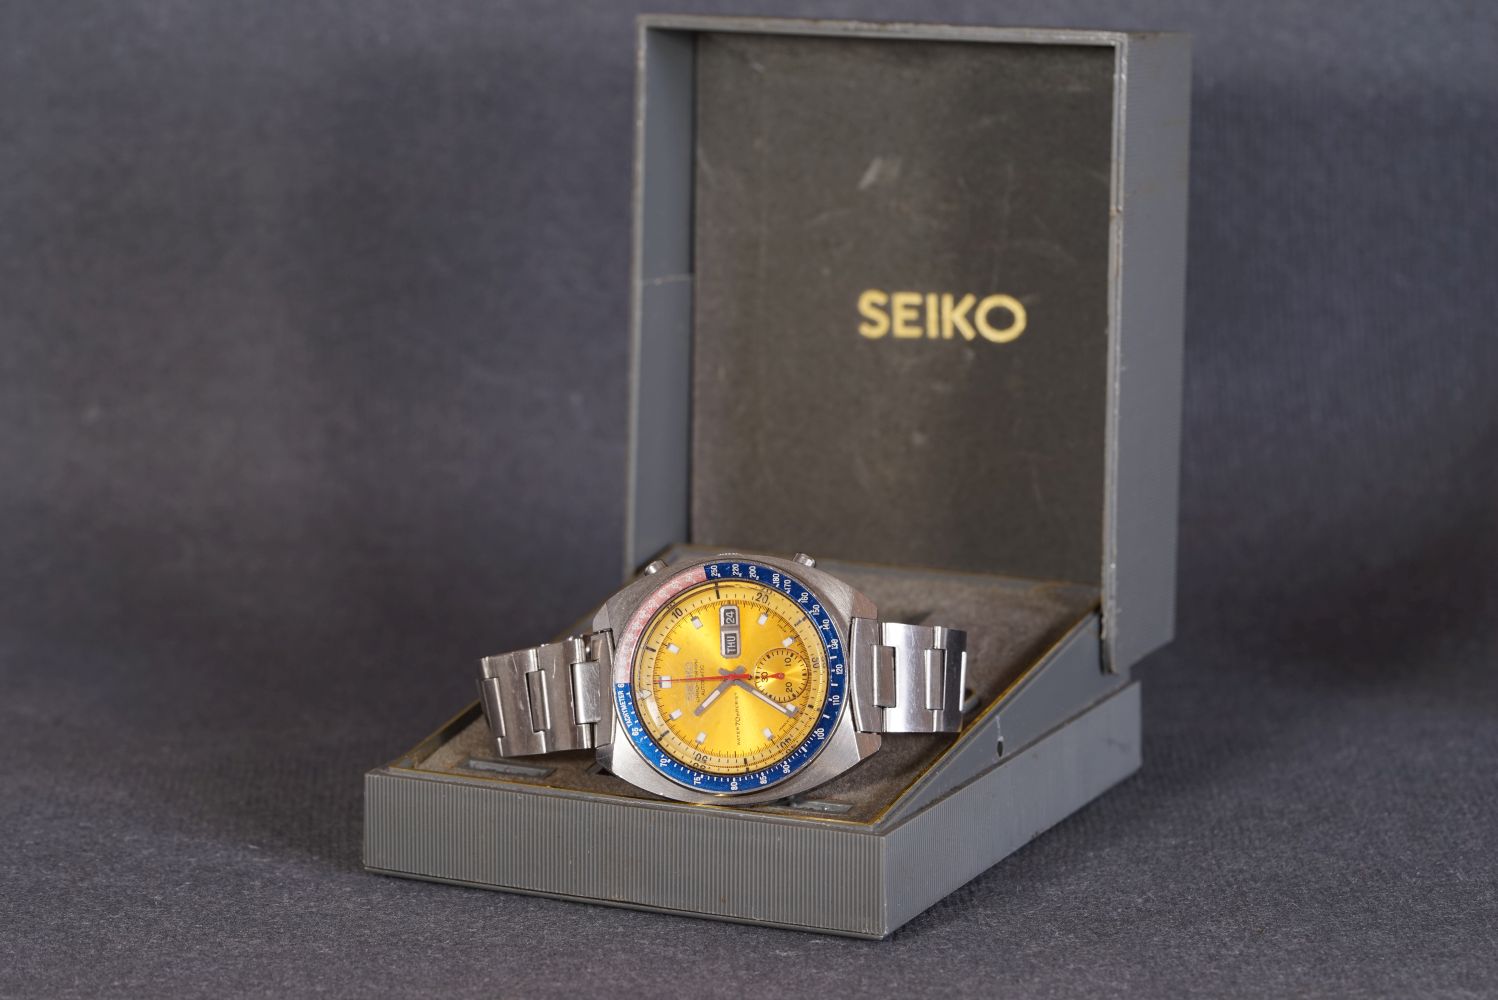 GENTLEMENS SEIKO 'POGUE' CHRONOGRAPH WRISTWATCH W/ BOX, circular orange dial with block hour markers - Image 2 of 2